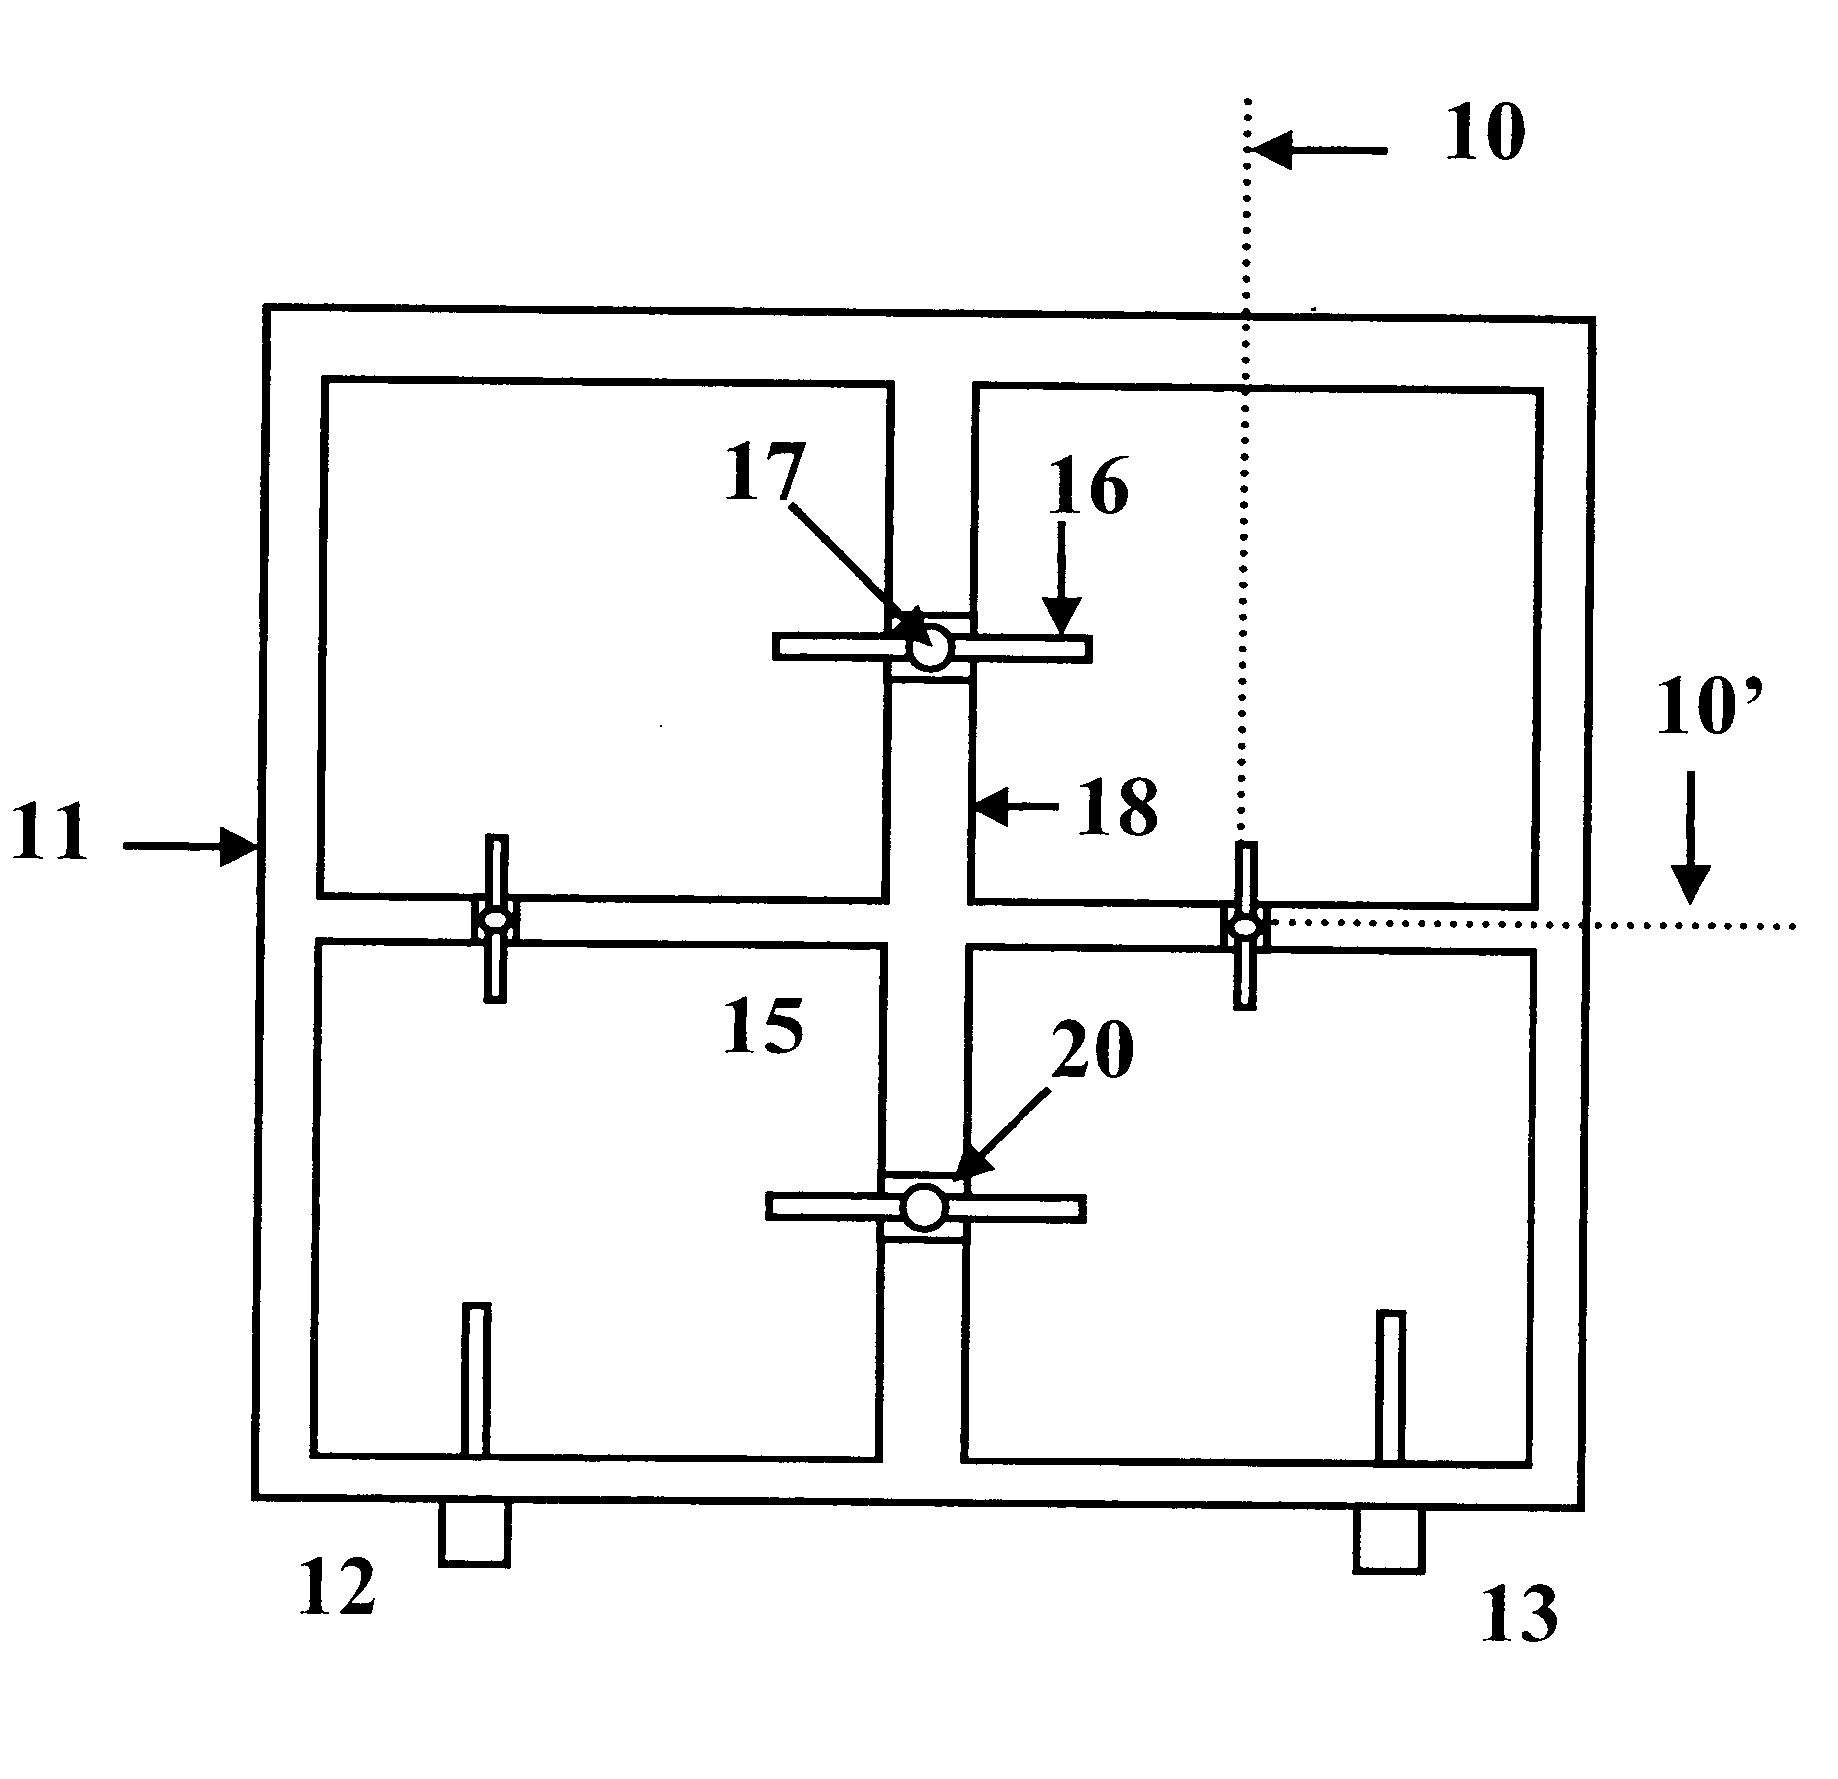 Dielectric resonator filter